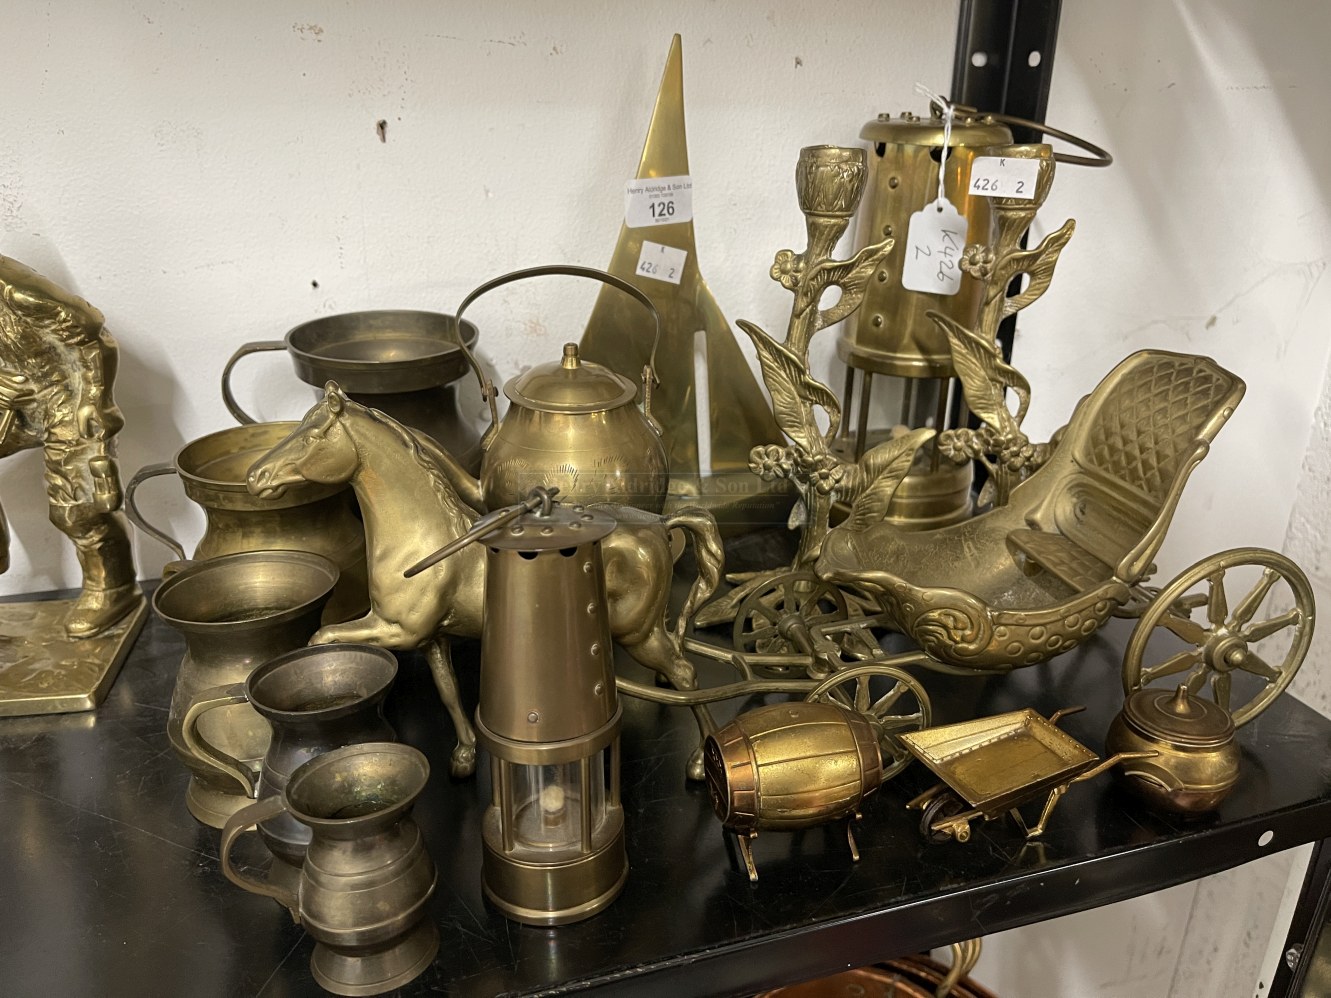 Brassware: Five graduated tankards, horse and carriage figure, two reproduction miners lamps, yacht, - Image 2 of 2